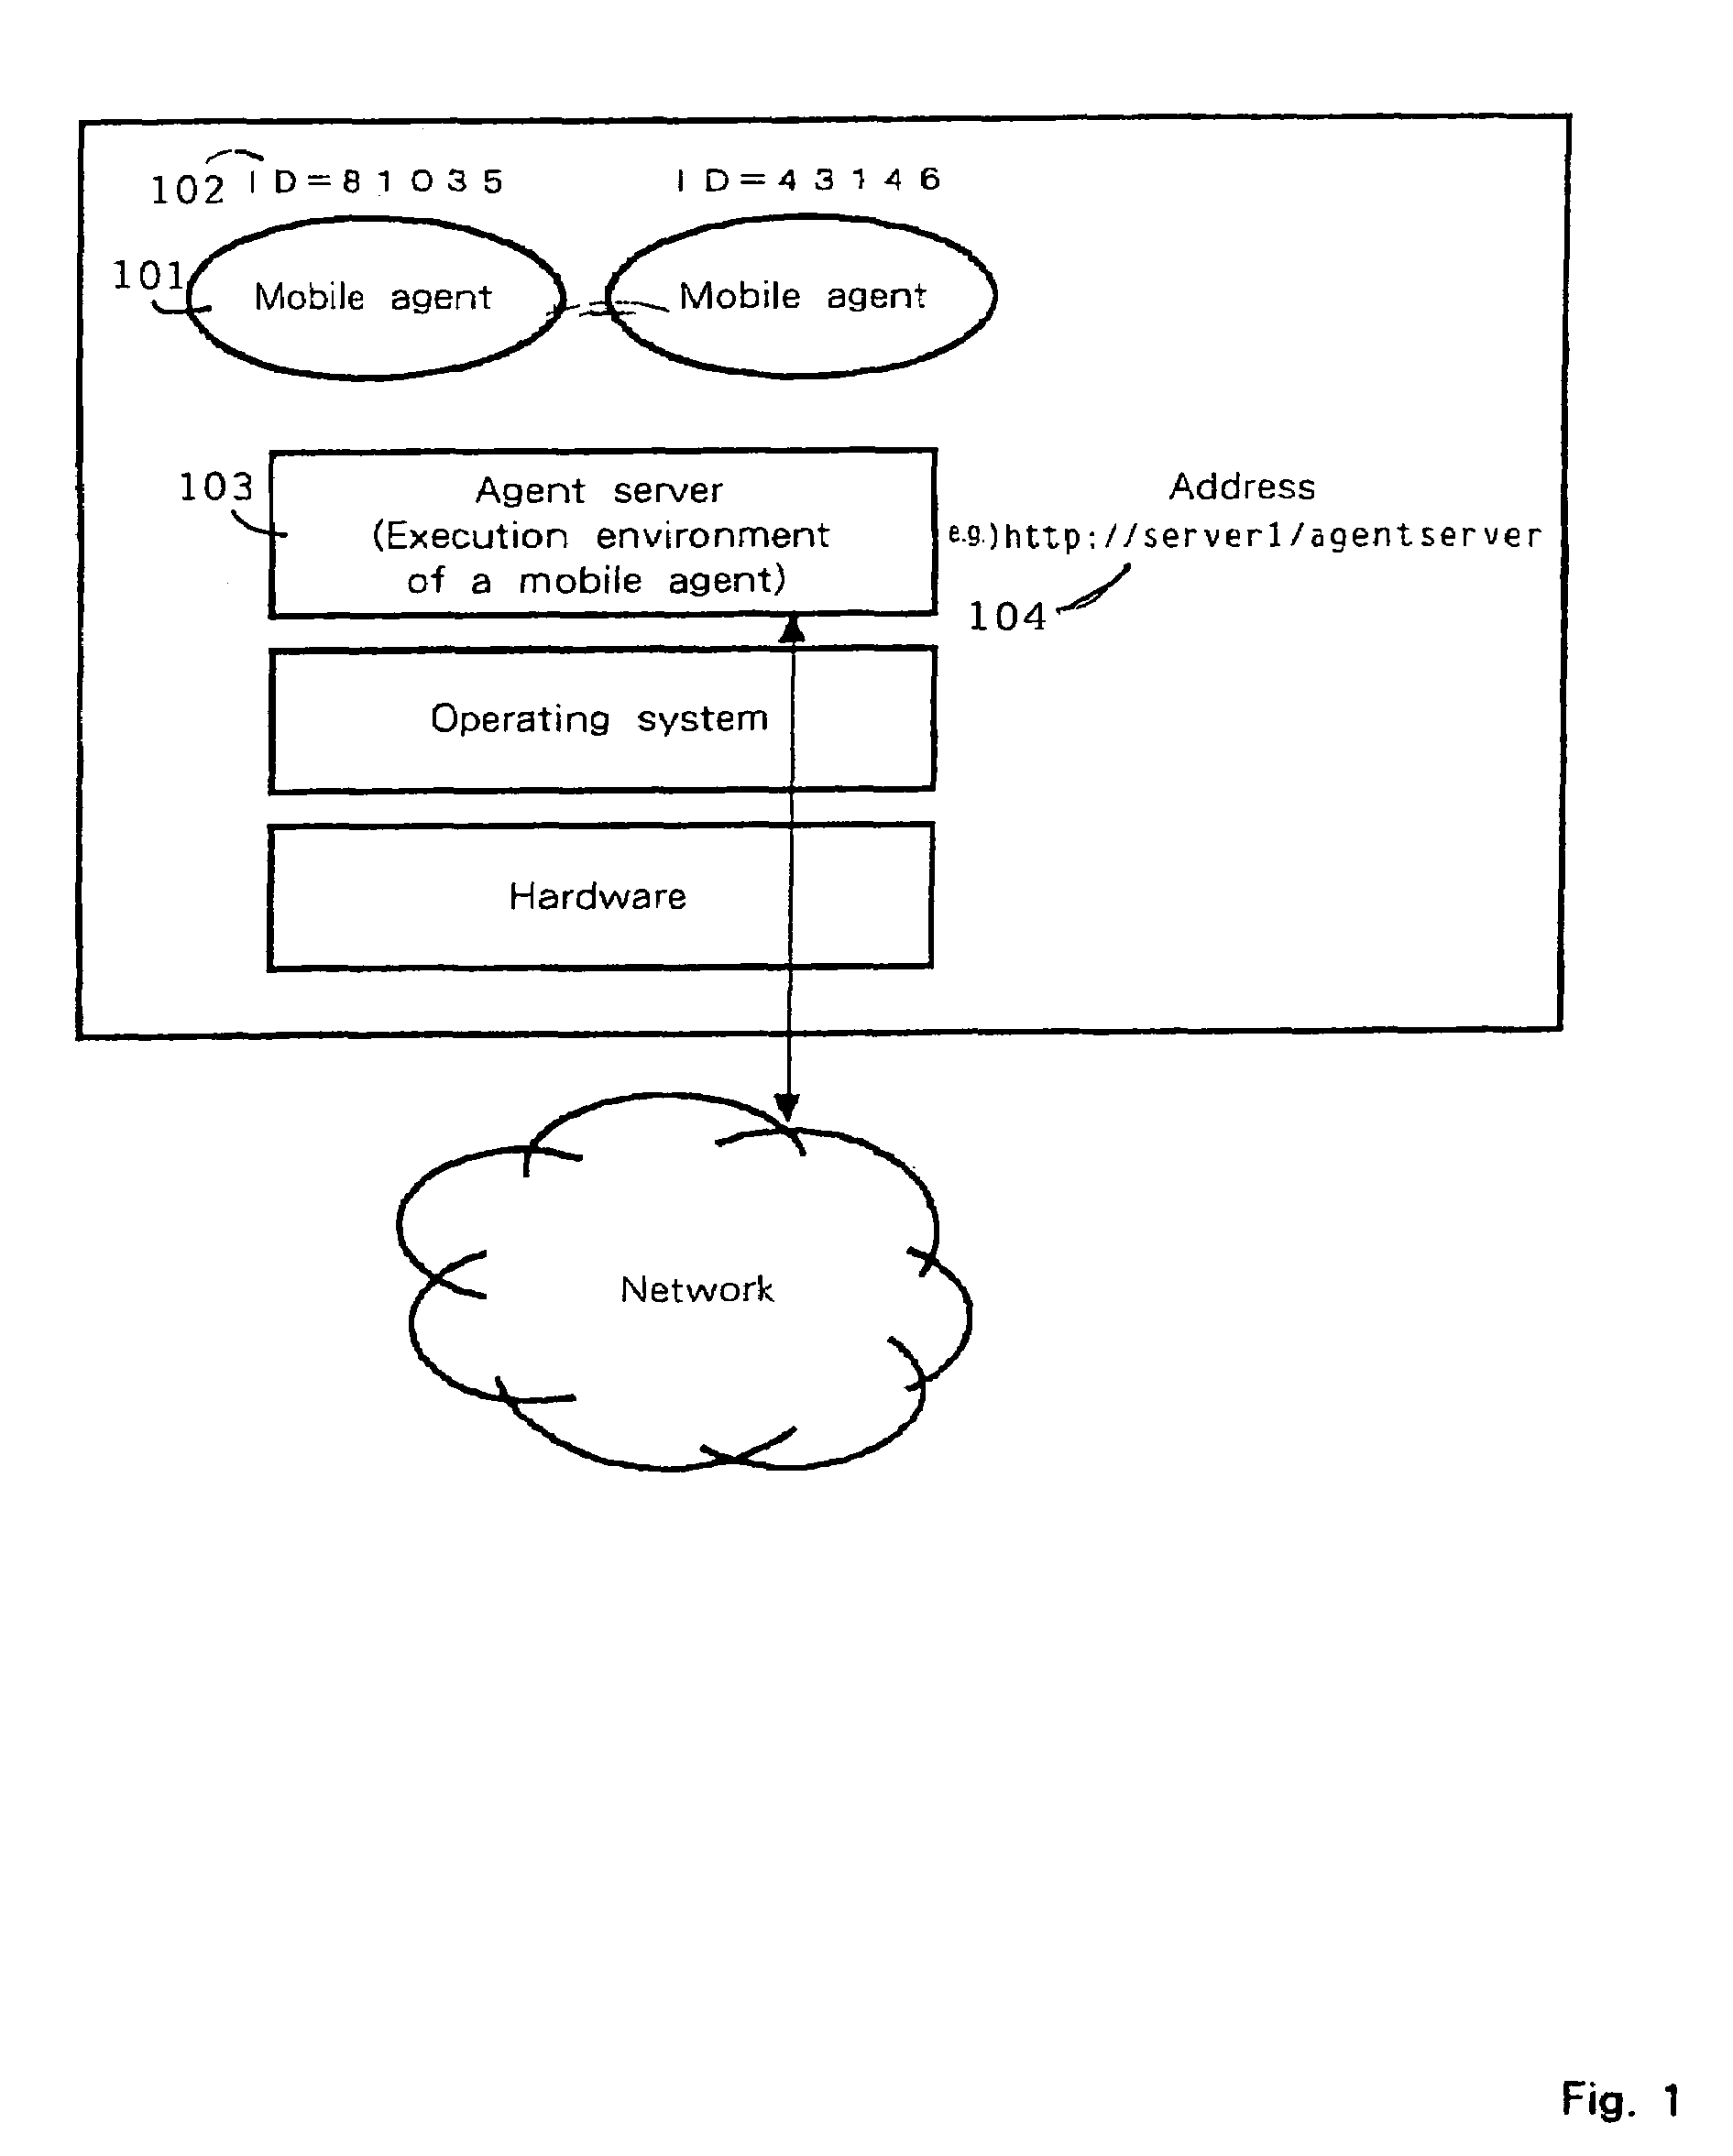 Apparatus and method for managing mobile agents